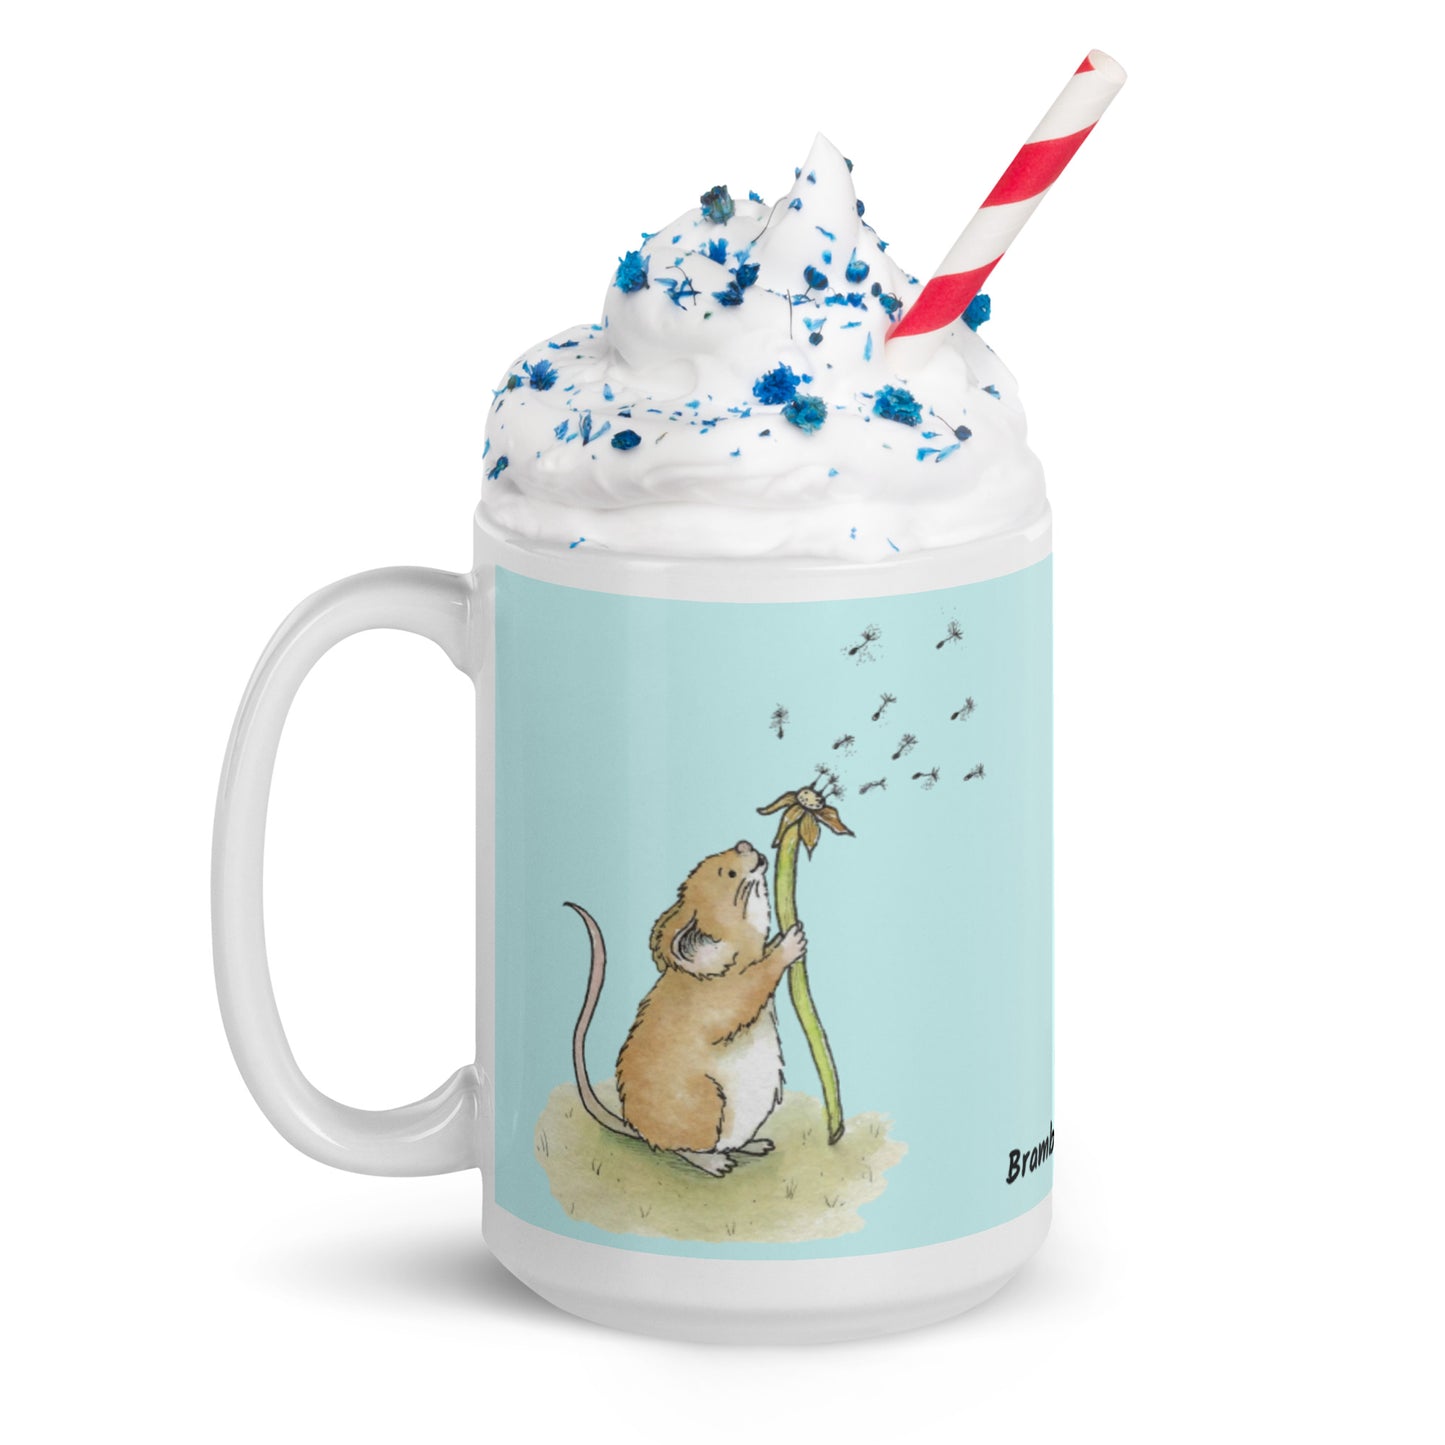 Two-sided image of original Dandelion wish design of cute watercolor mouse blowing dandelion seeds  featured on 15 ounce mug with light blue background. Handle facing left.